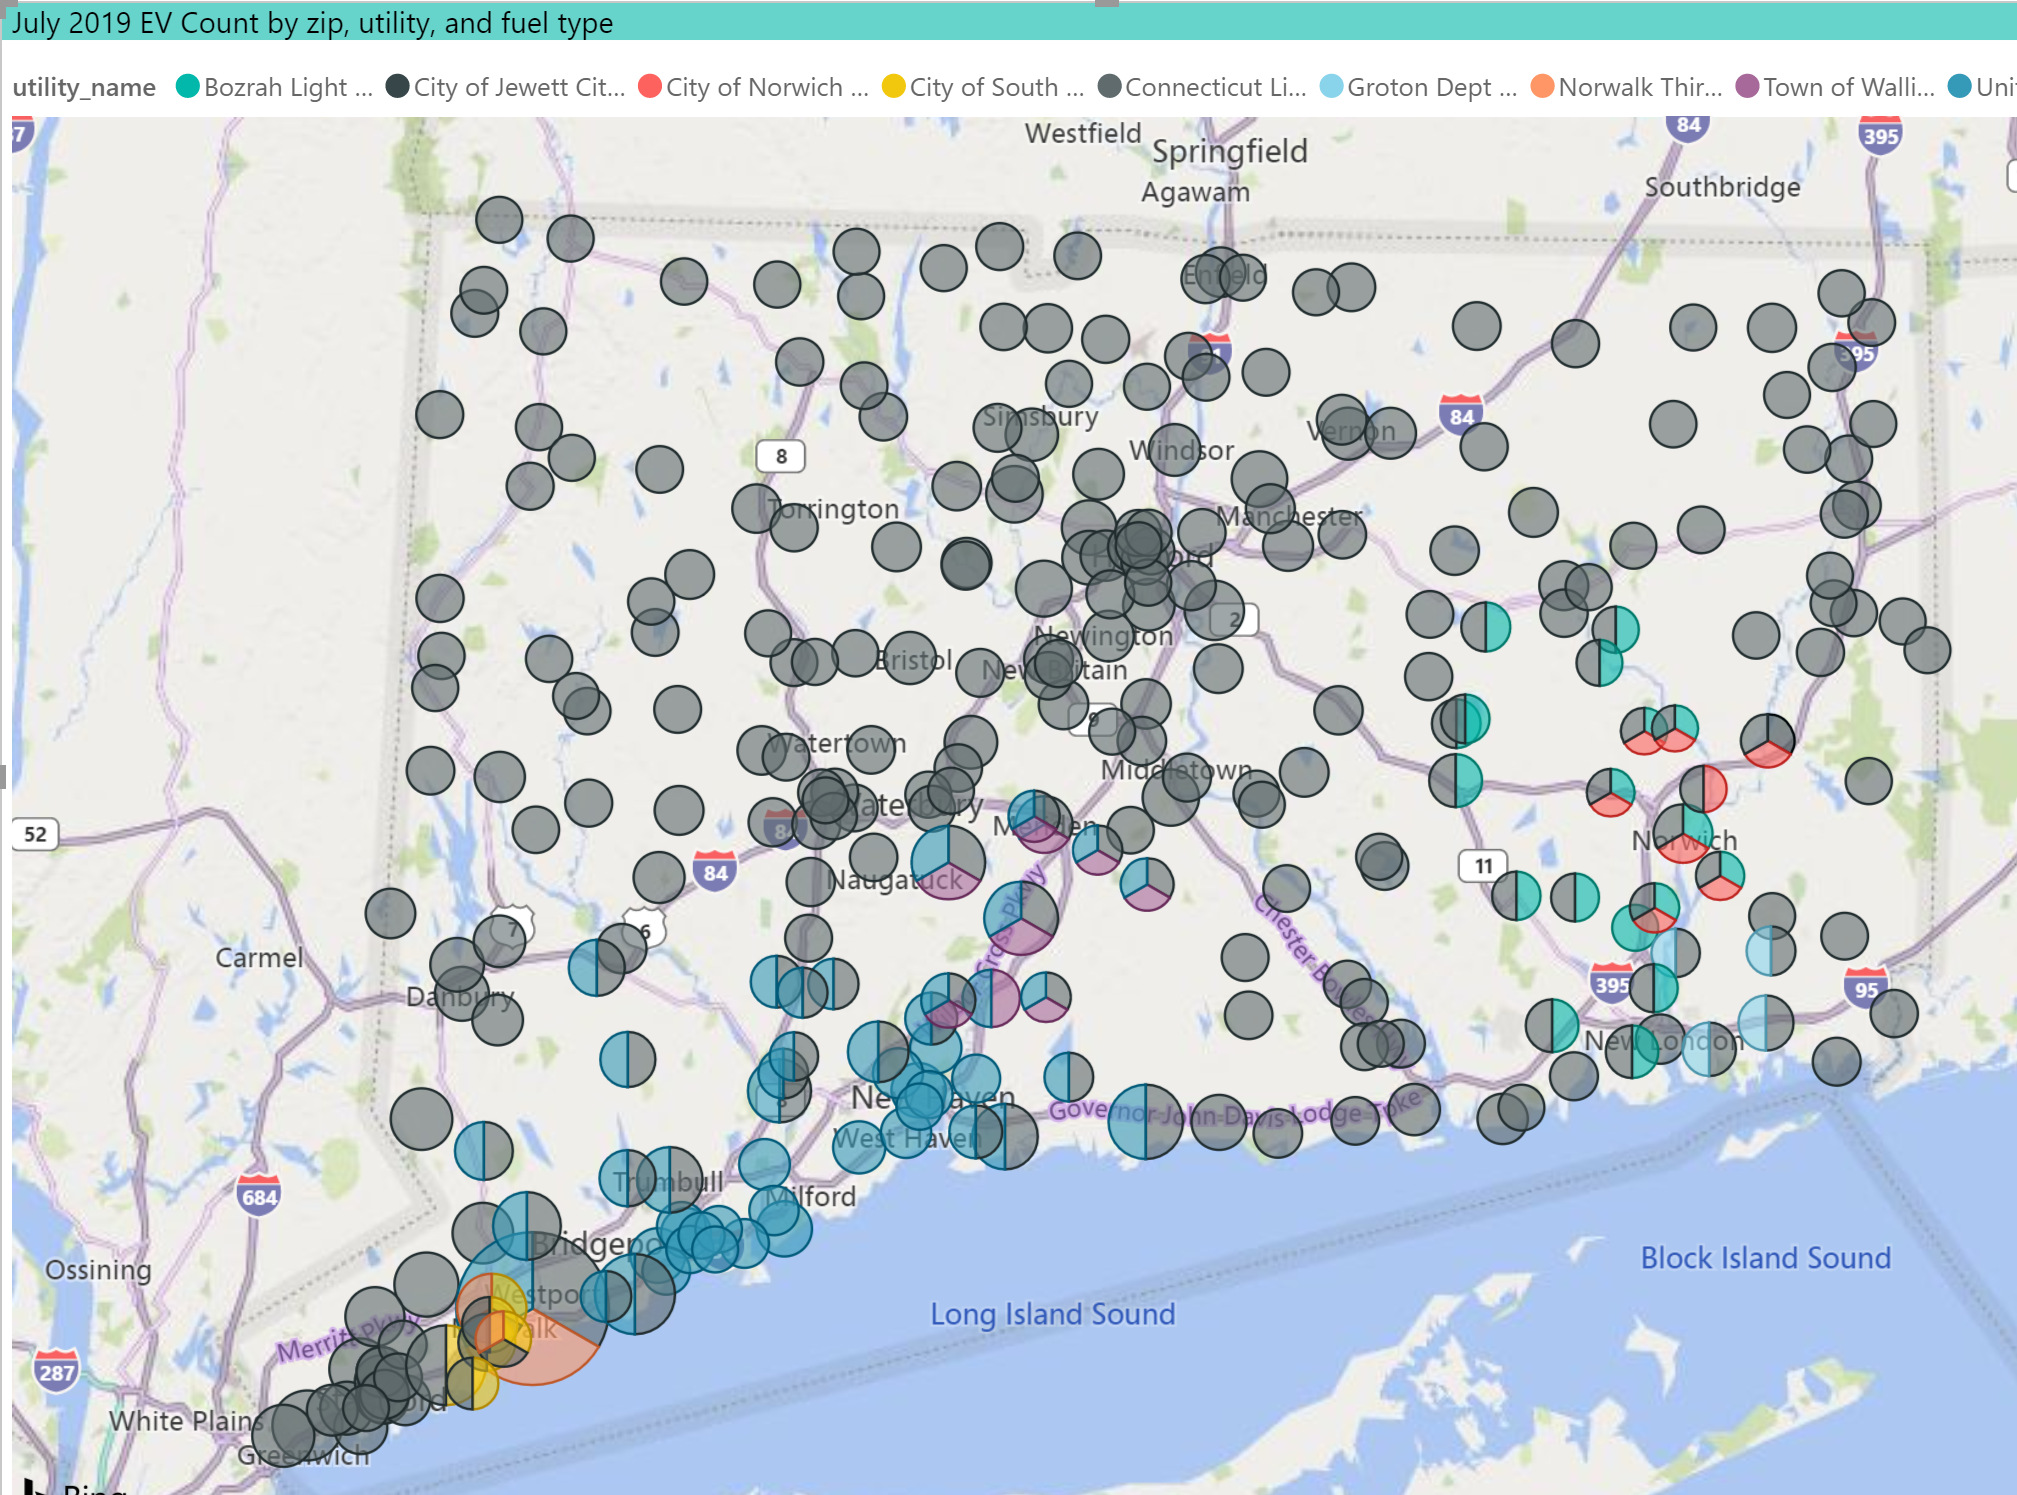 Map of EVs by Zip Code by Utility Service Area EV Club of CT